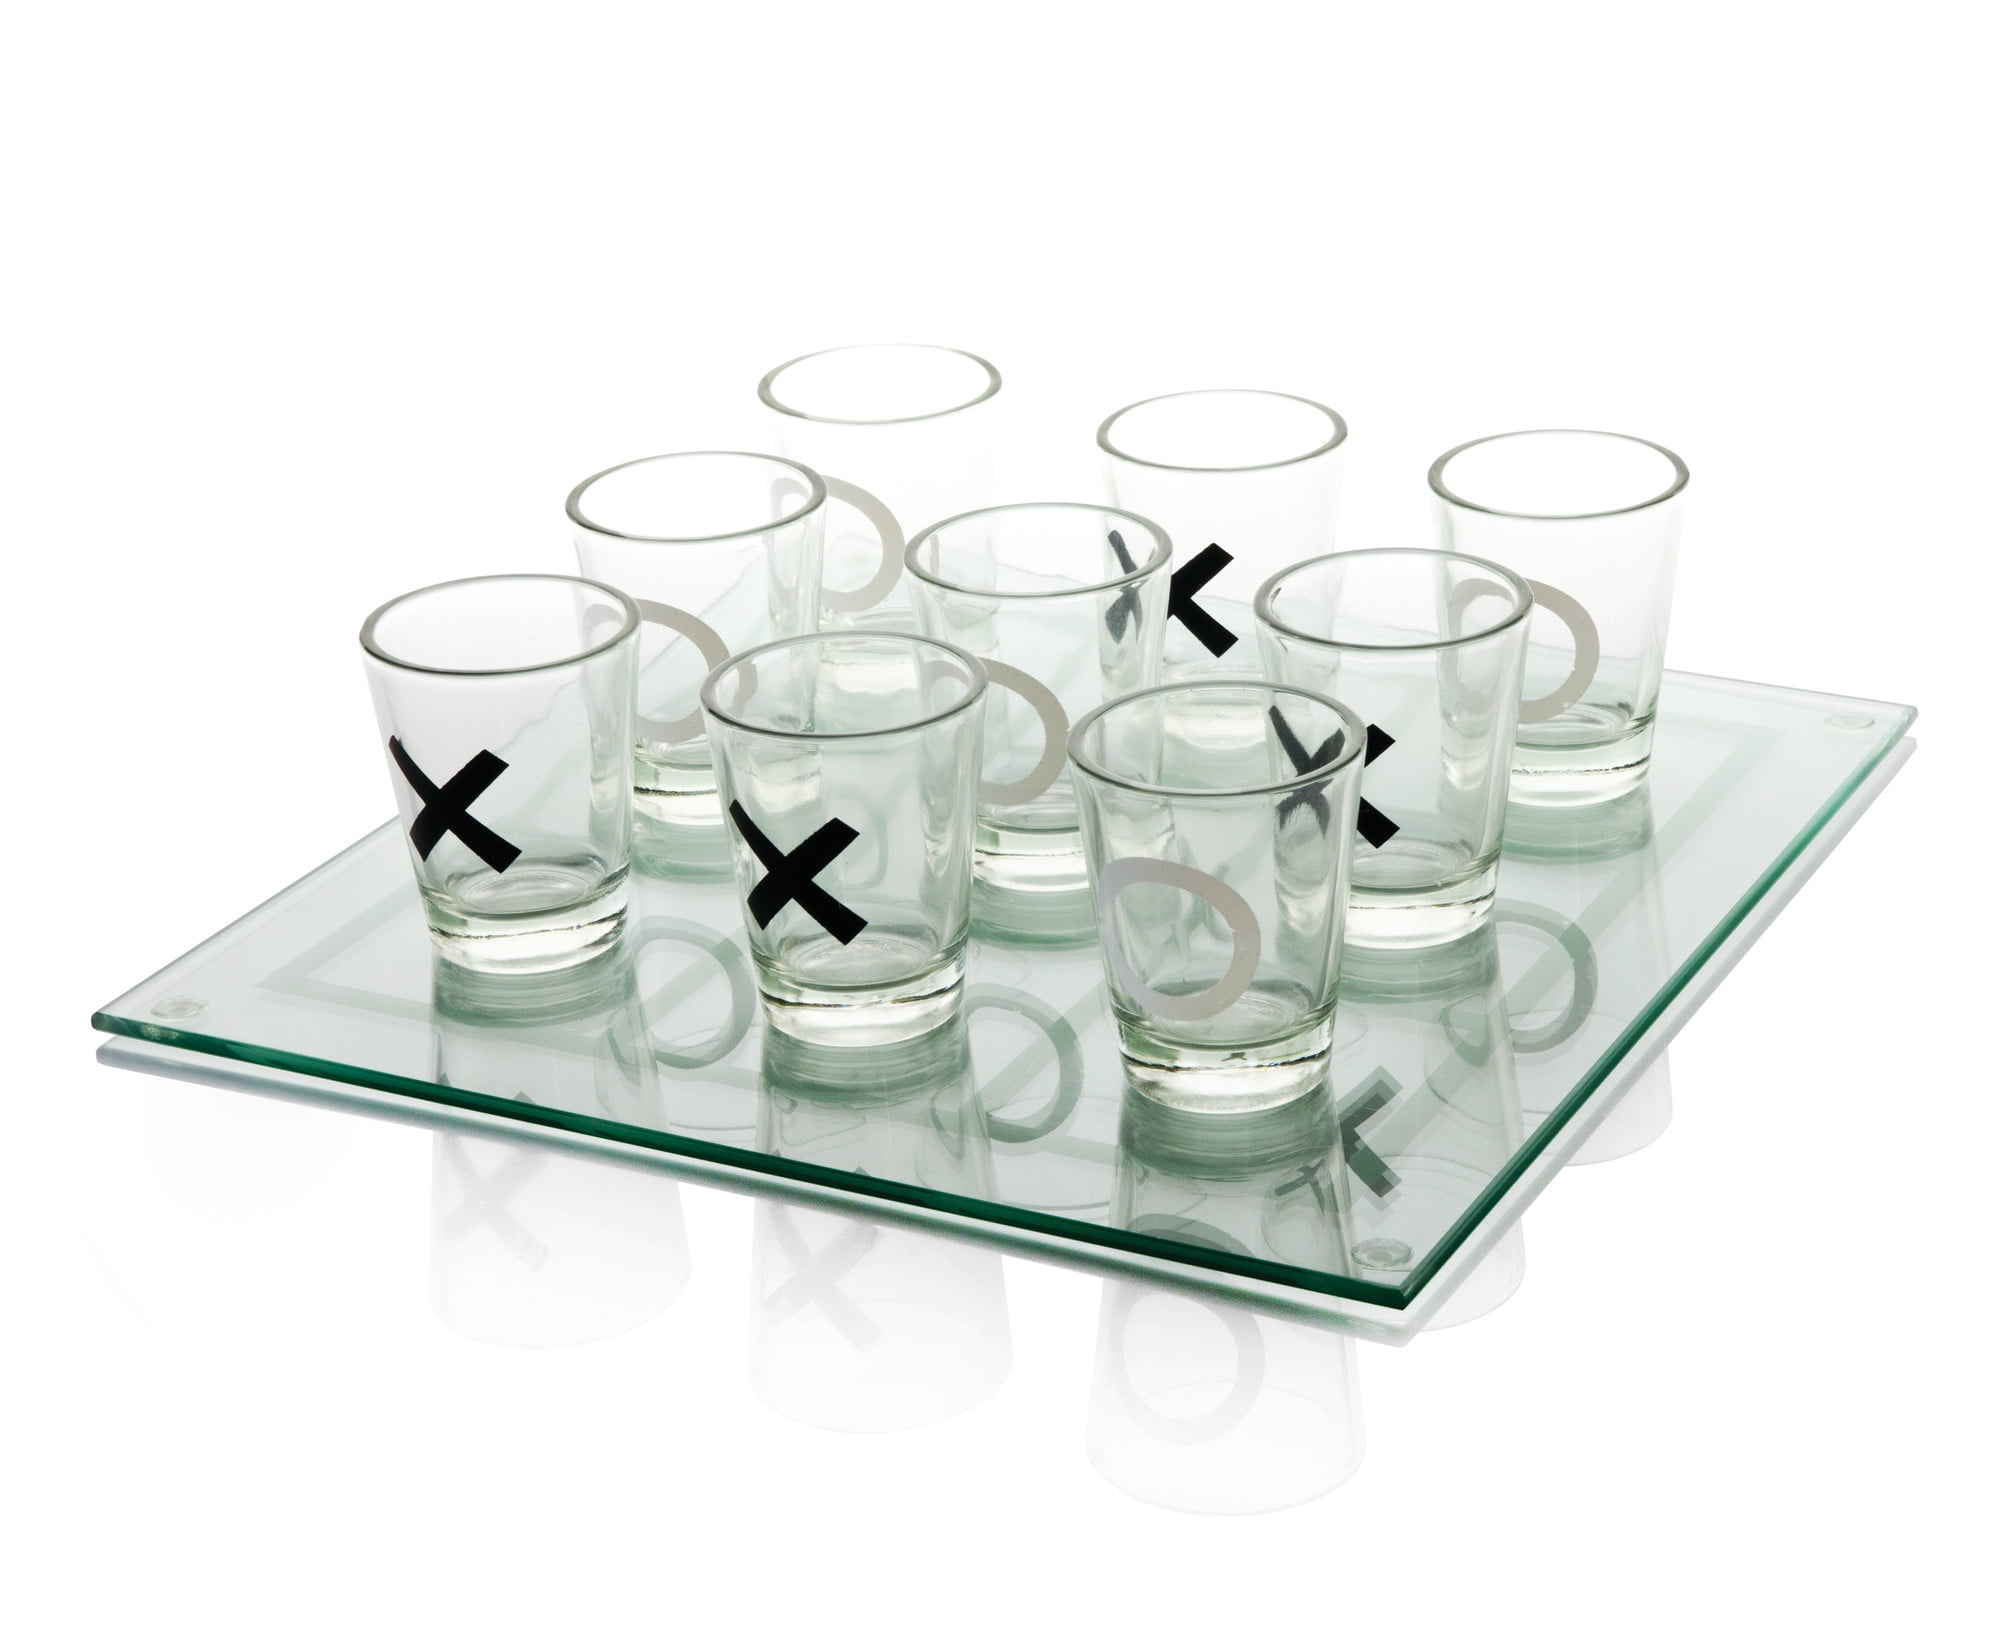 NEW Shot Glass Tic-Tac-Toe Game.Drinking Spirits.Parties Events.Whiskey.Tequila. 